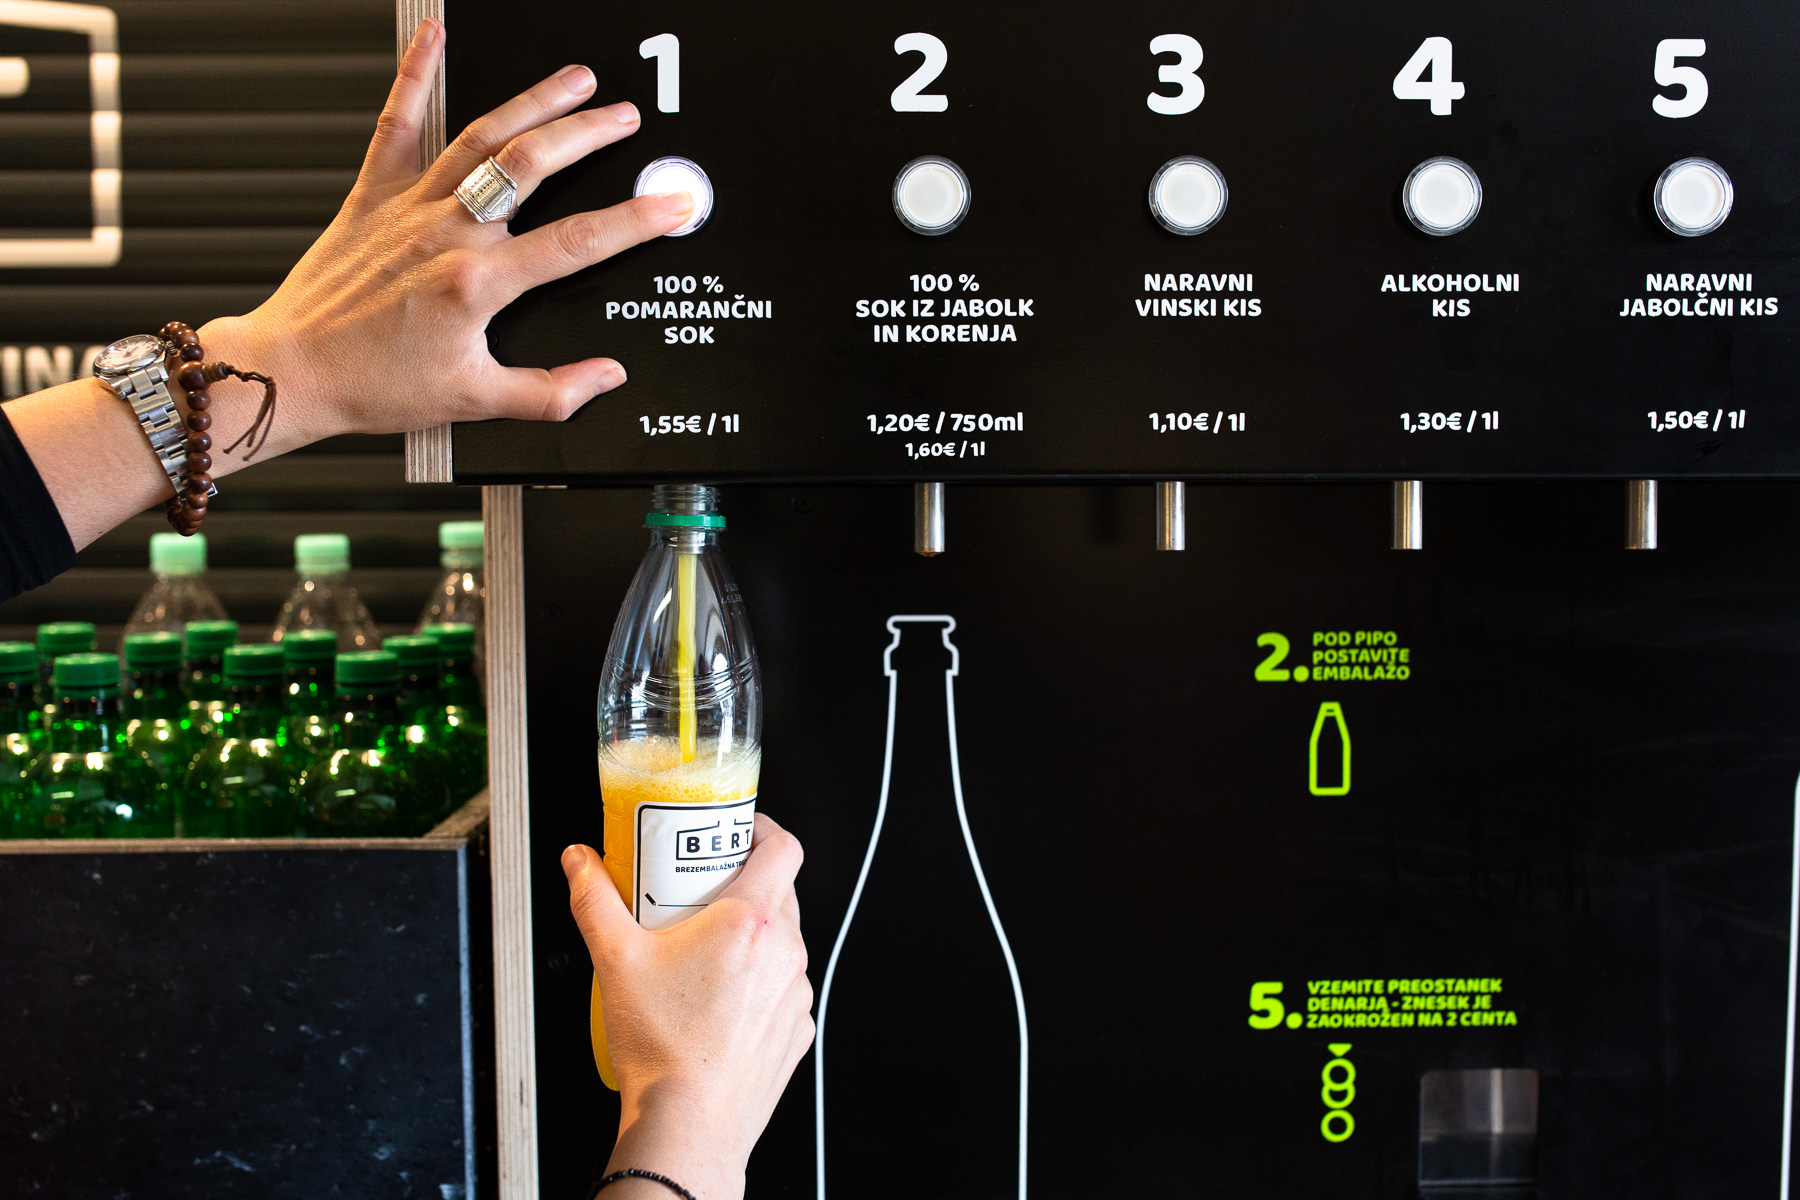 A customer uses one of two packaging-free vending machines called BERT  that offers 18 liquid products in Ljubljana, May 8, 2019. Using your own bottle or the one provided by BERT customers can buy shampoos, detergents,  juices, several types of vinegar and oil.